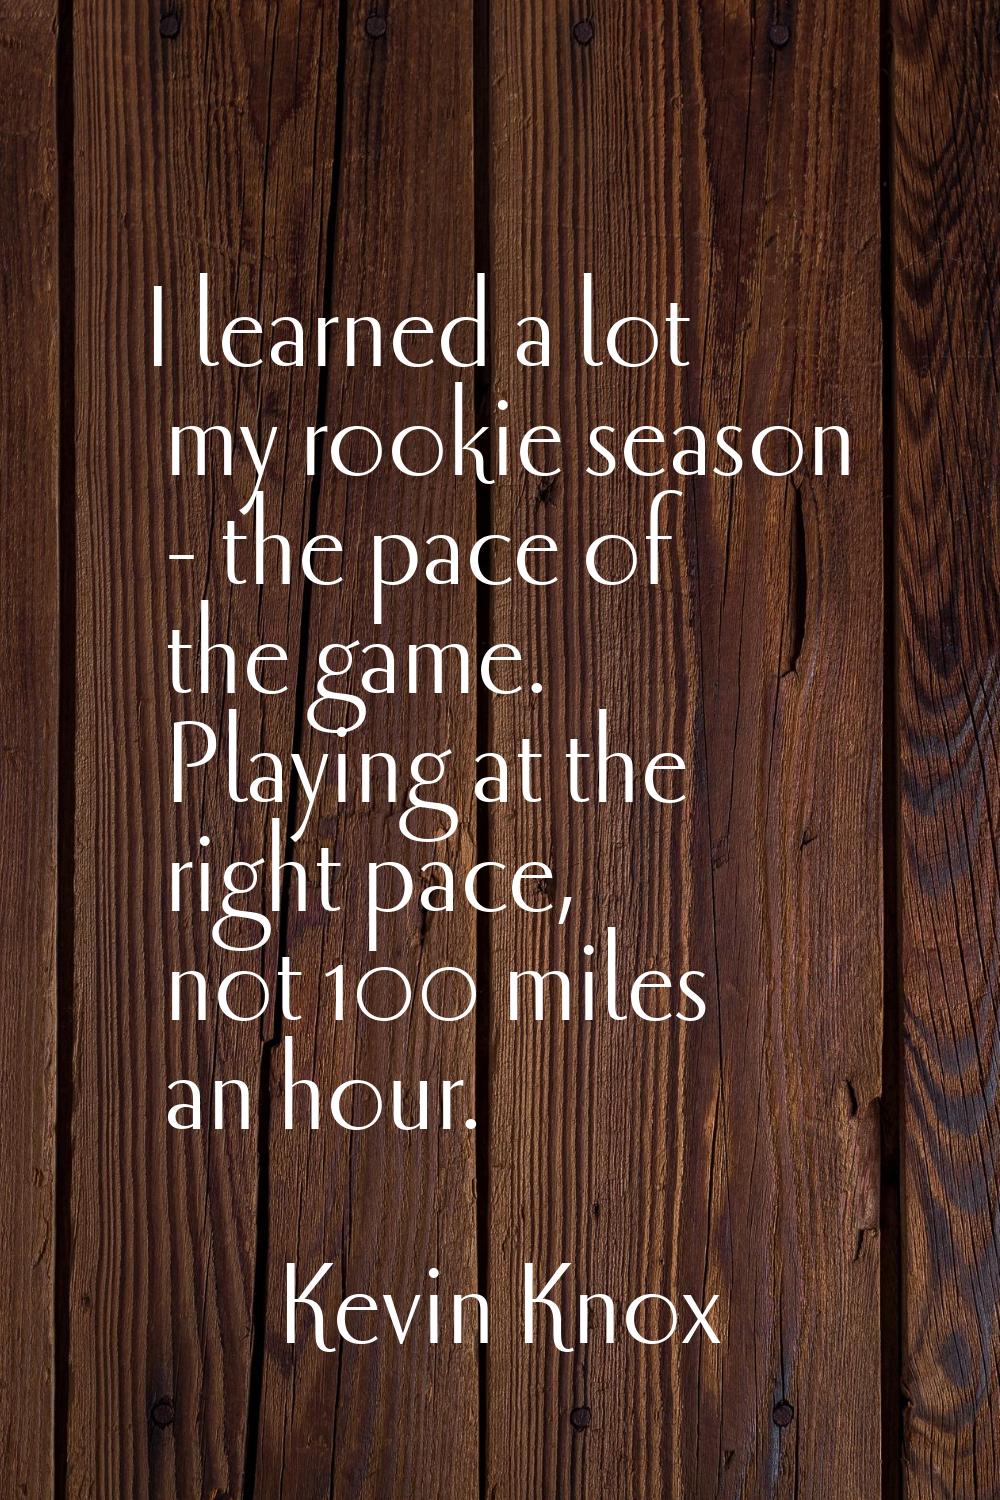 I learned a lot my rookie season - the pace of the game. Playing at the right pace, not 100 miles a